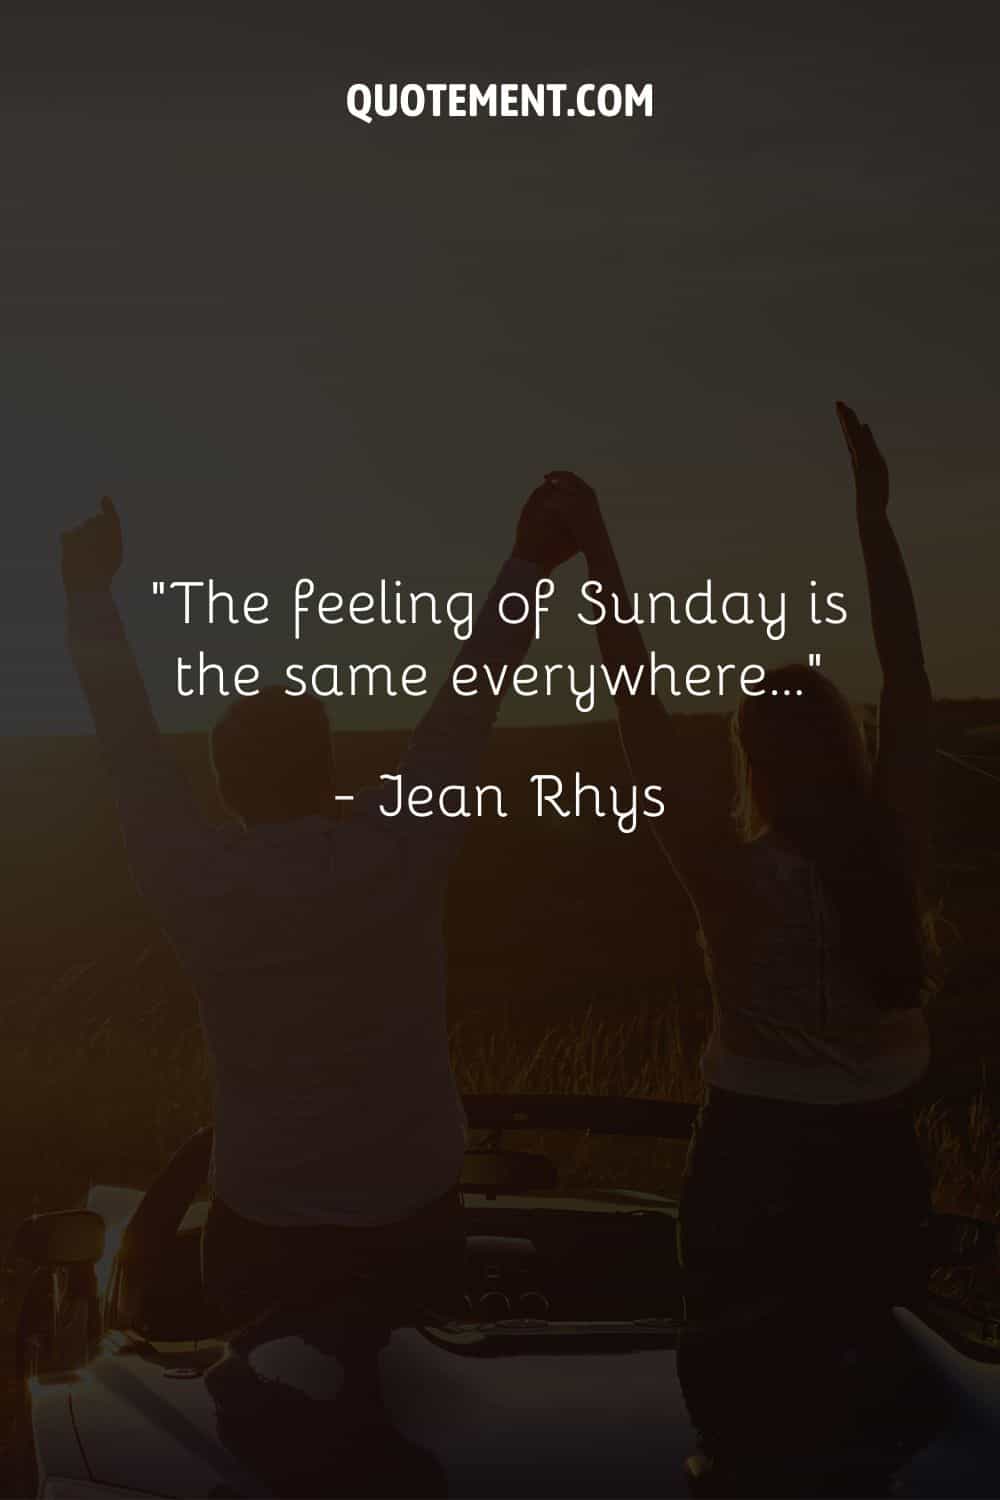 The feeling of Sunday is the same everywhere